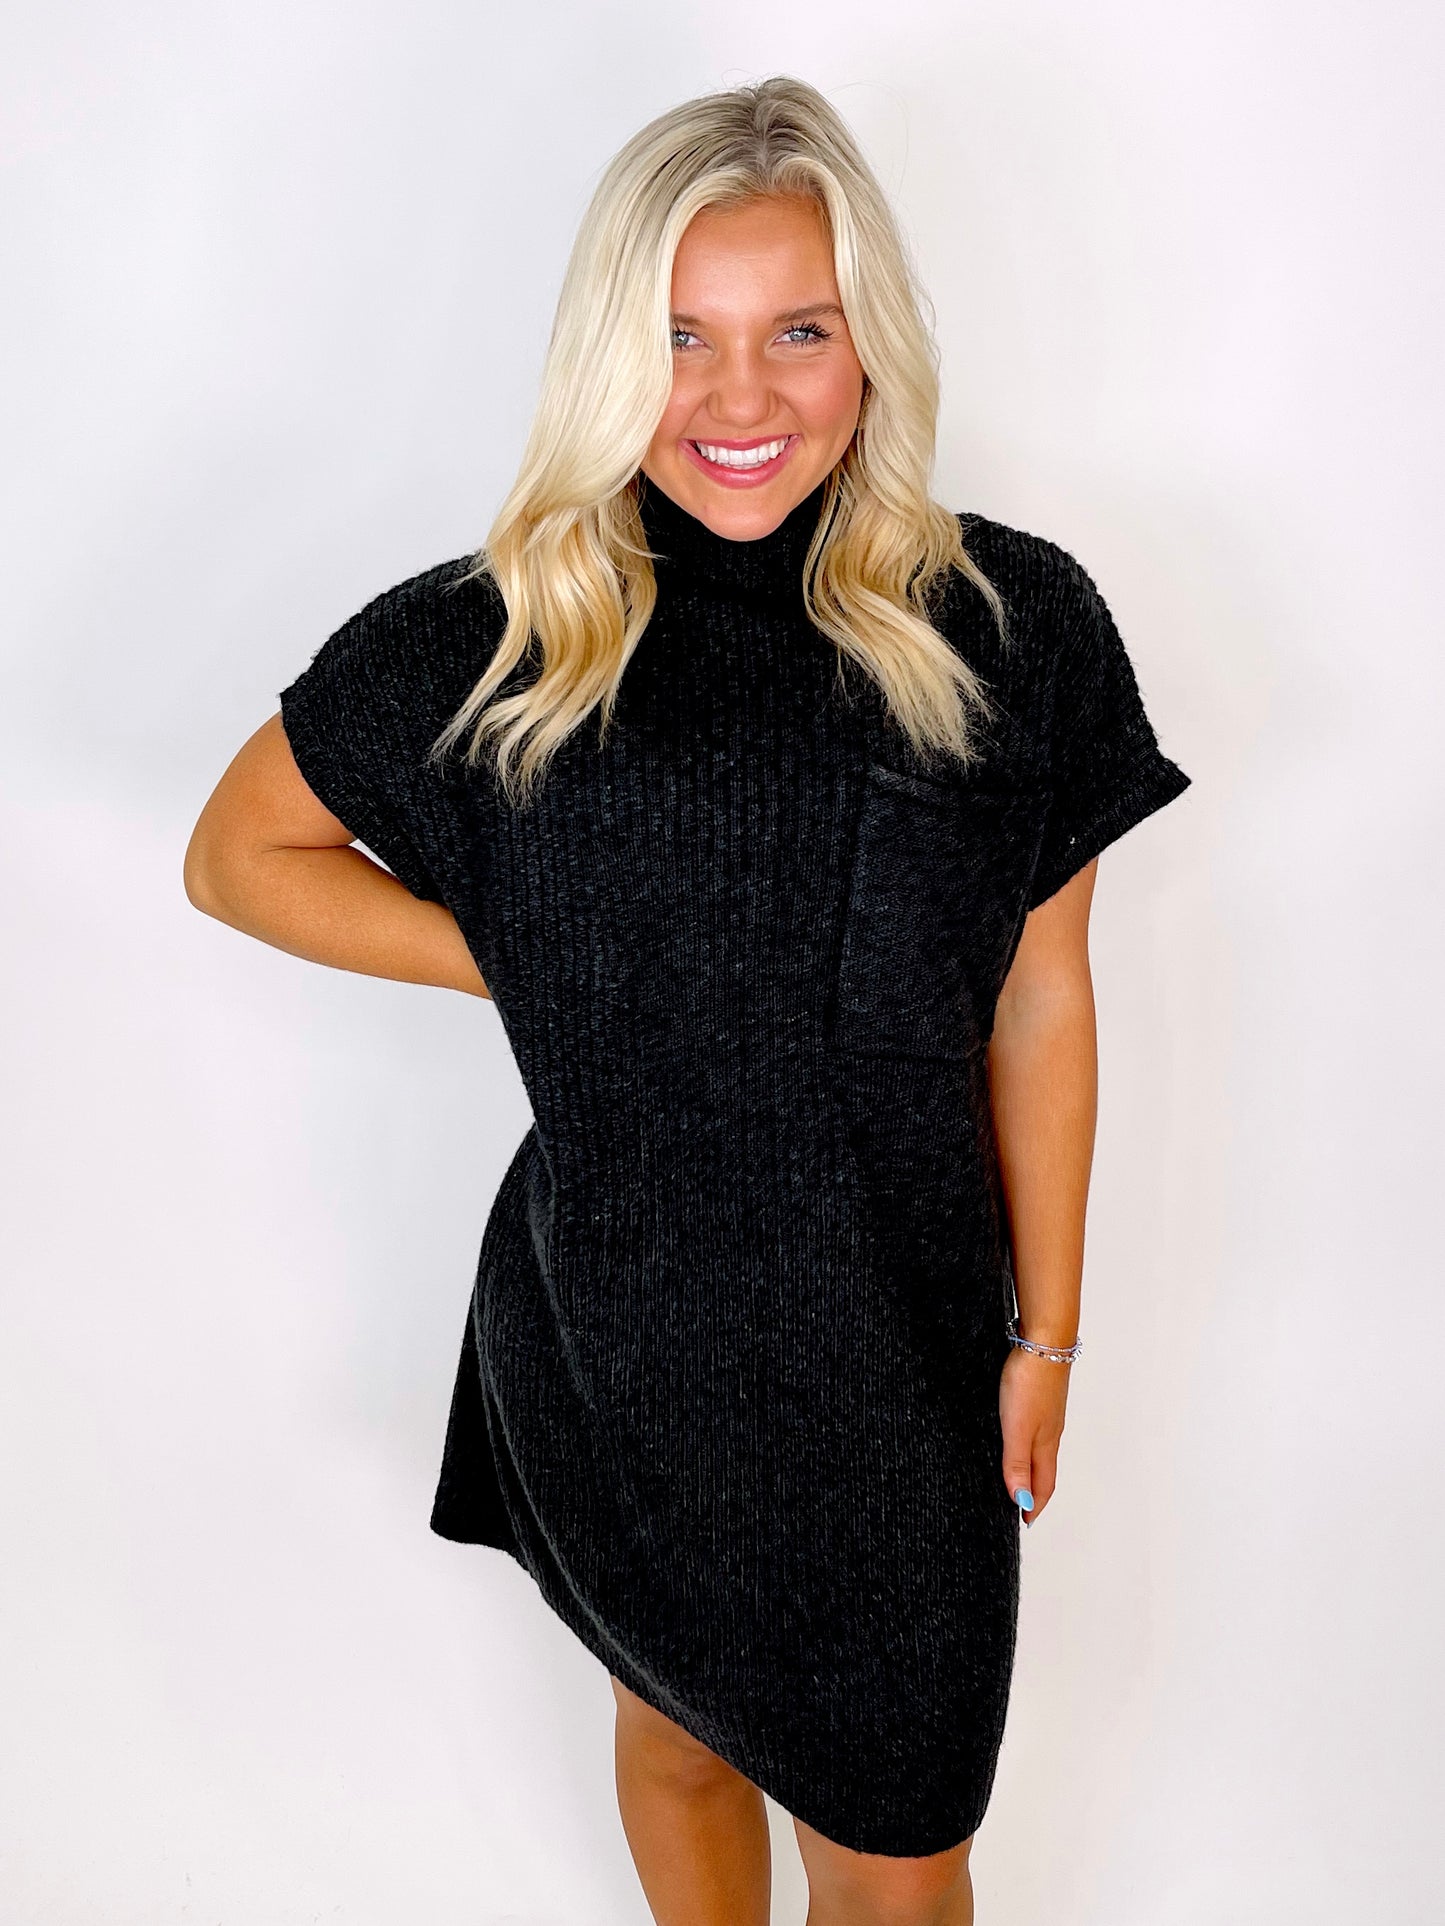 The Chloe Sweater Dress-Mini Dress-Entro-The Village Shoppe, Women’s Fashion Boutique, Shop Online and In Store - Located in Muscle Shoals, AL.